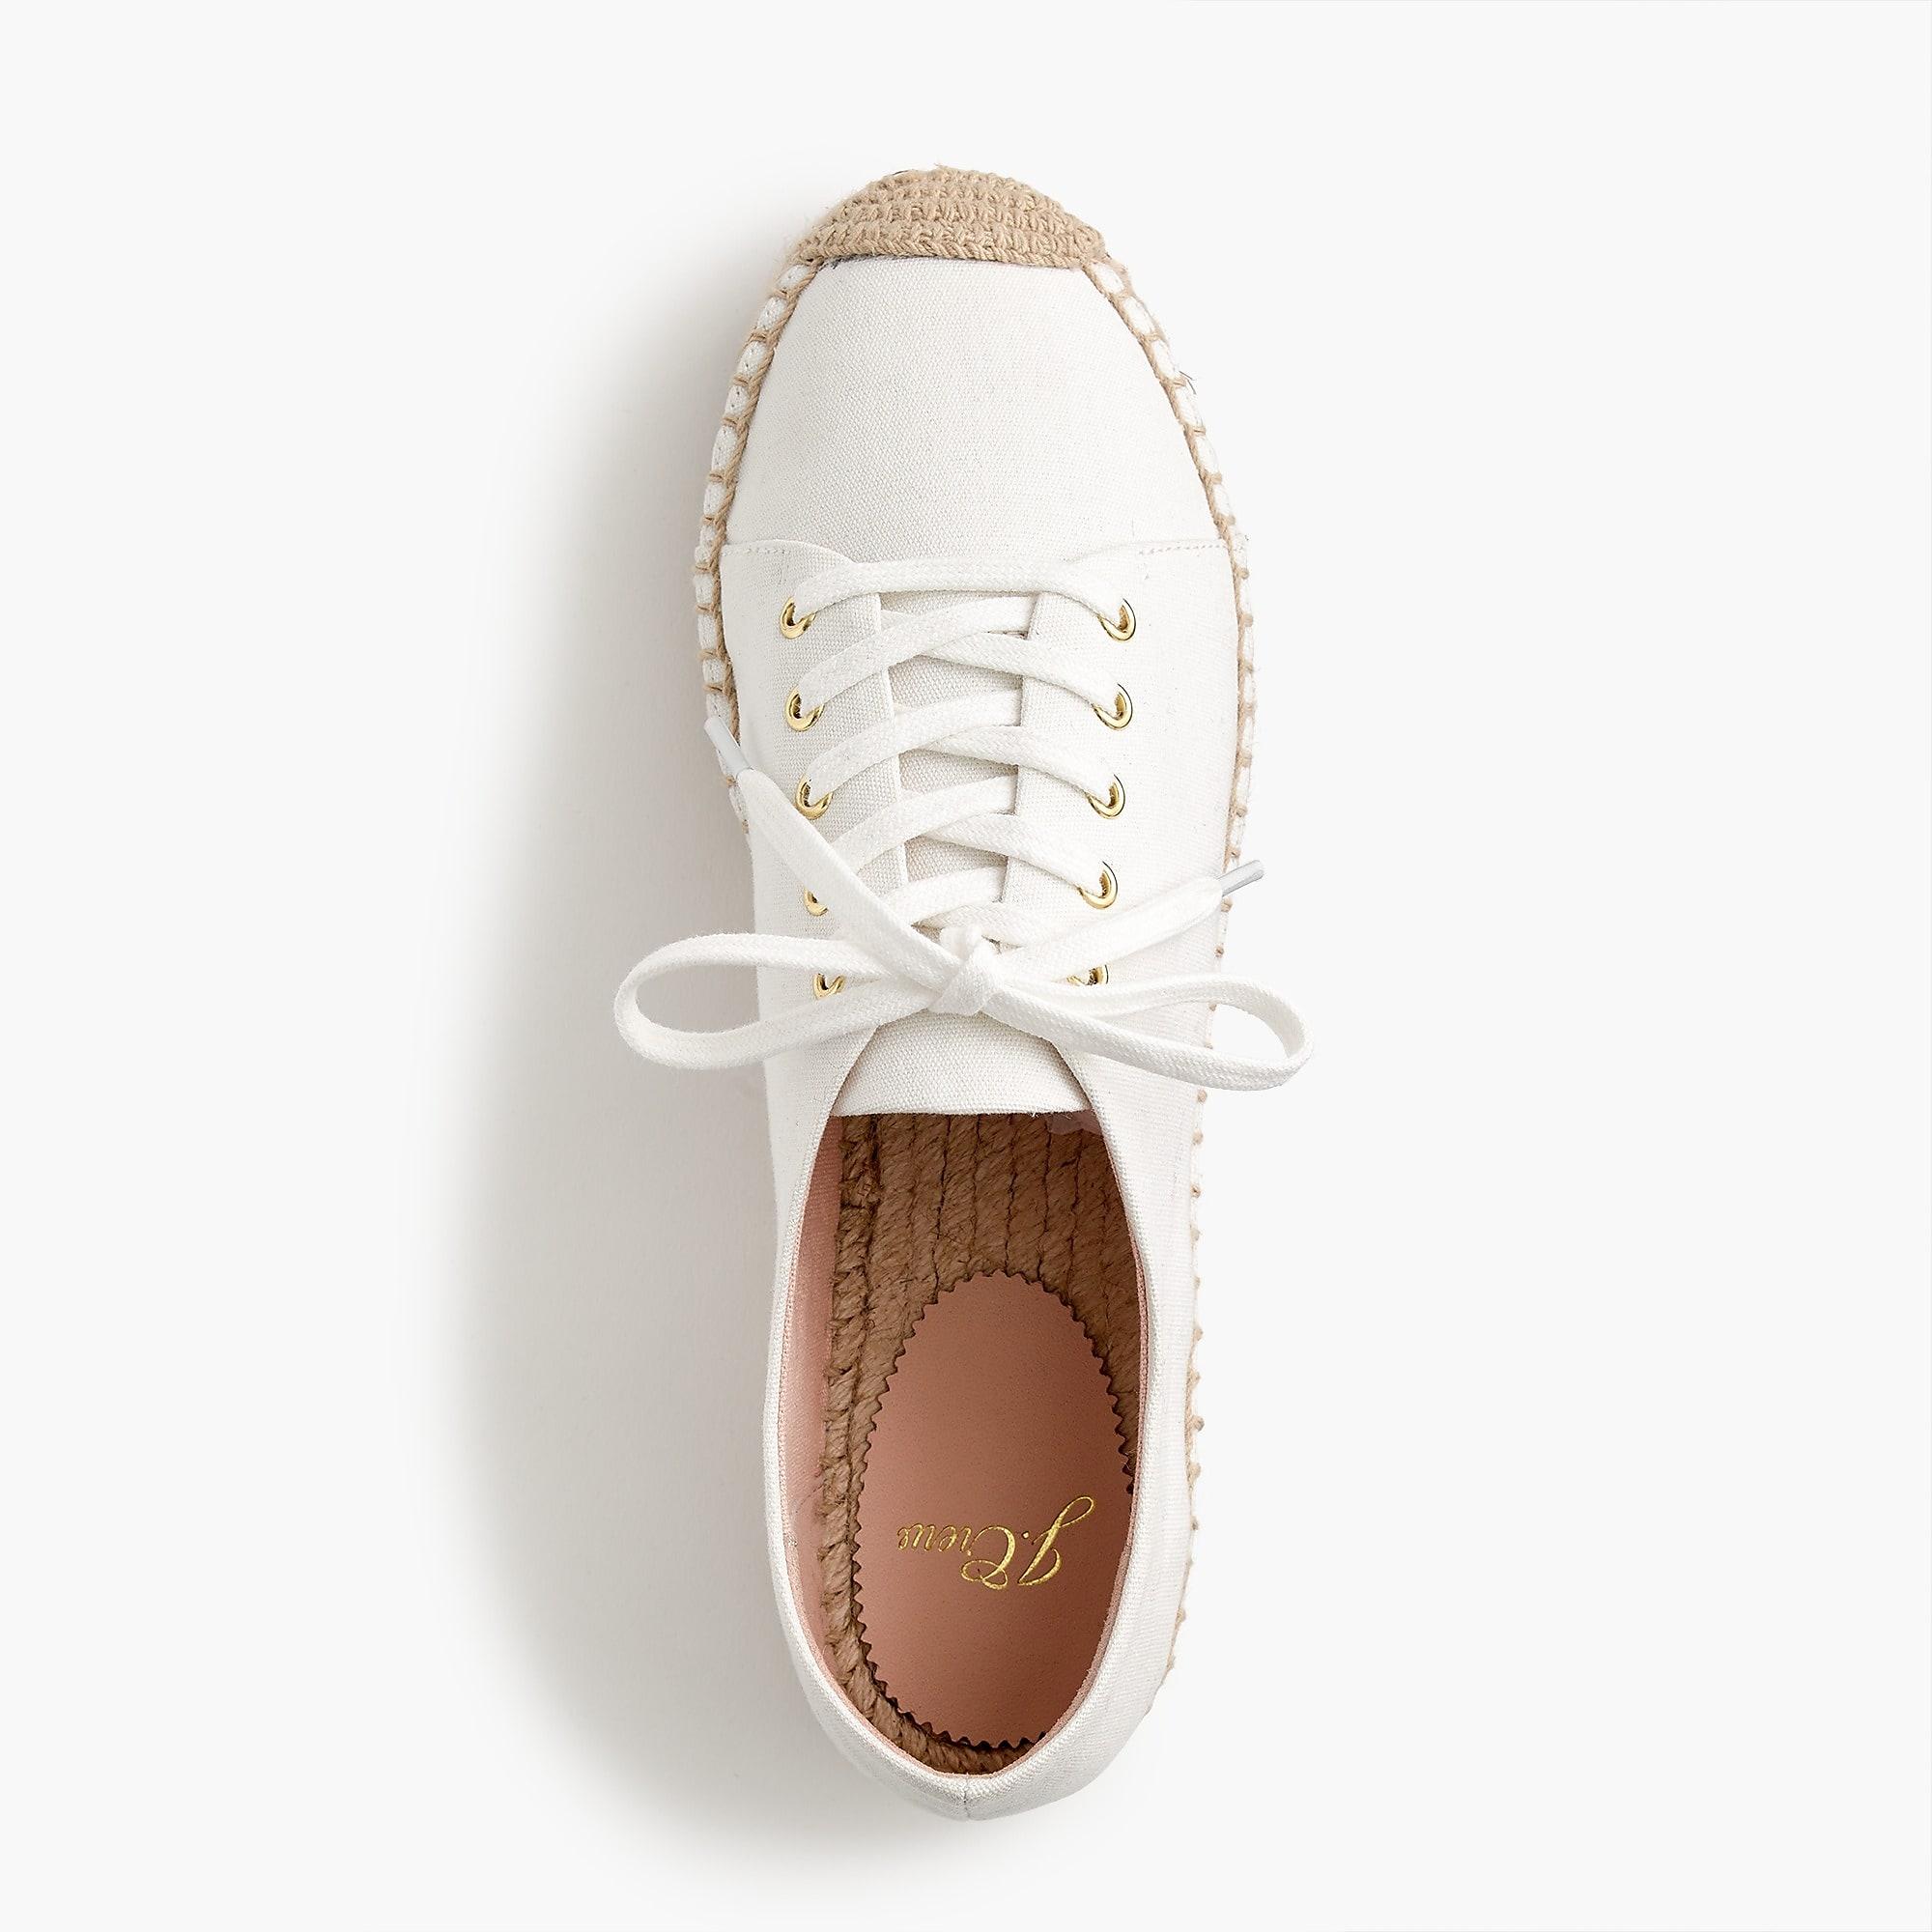 J.Crew Leather Espadrille Sneakers in 